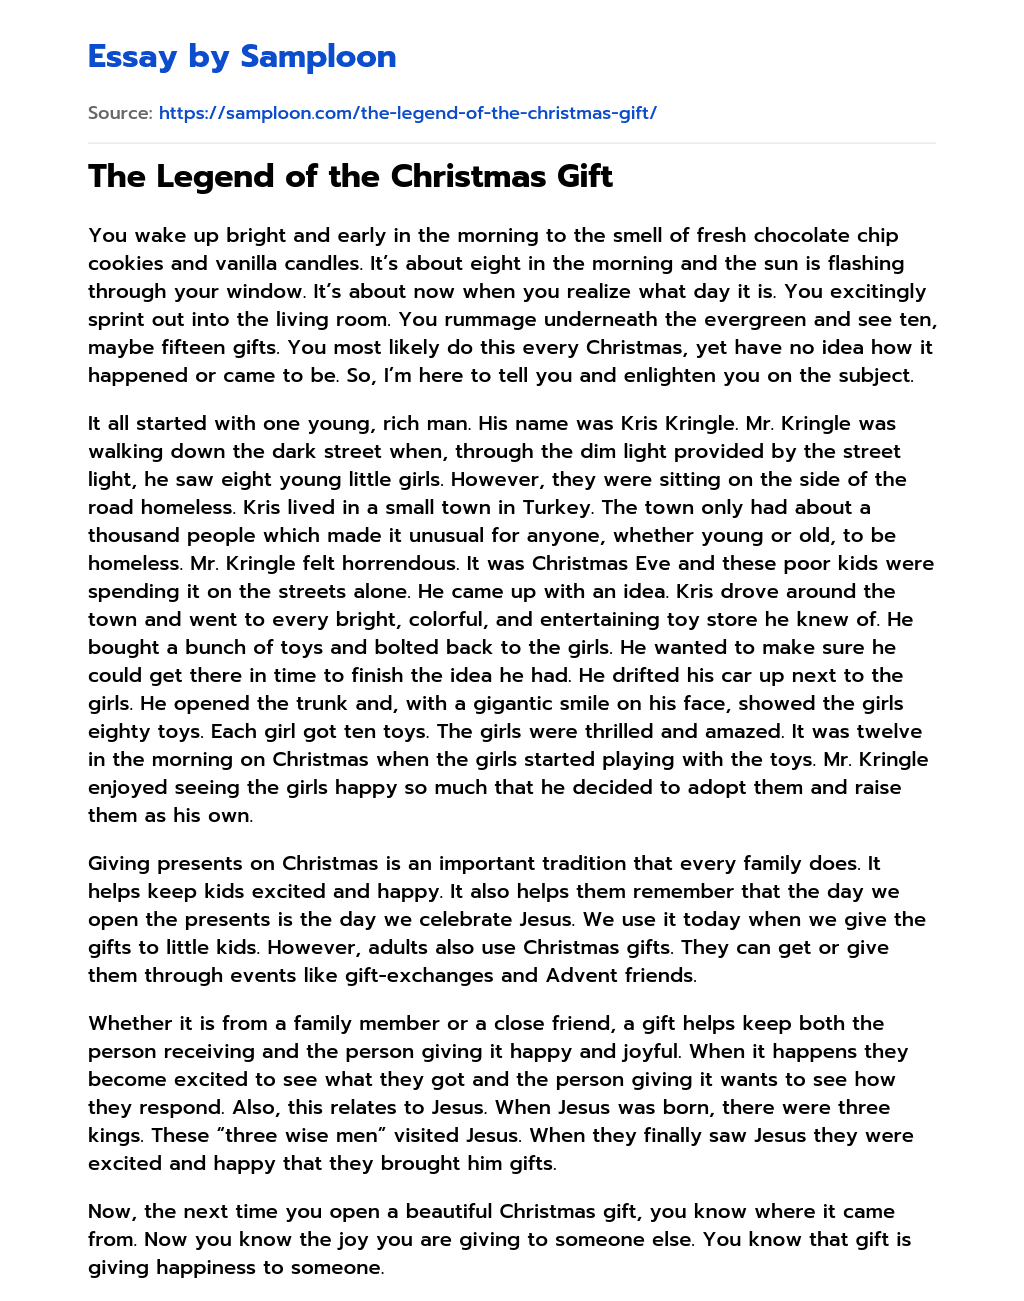 The Legend of the Christmas Gift essay